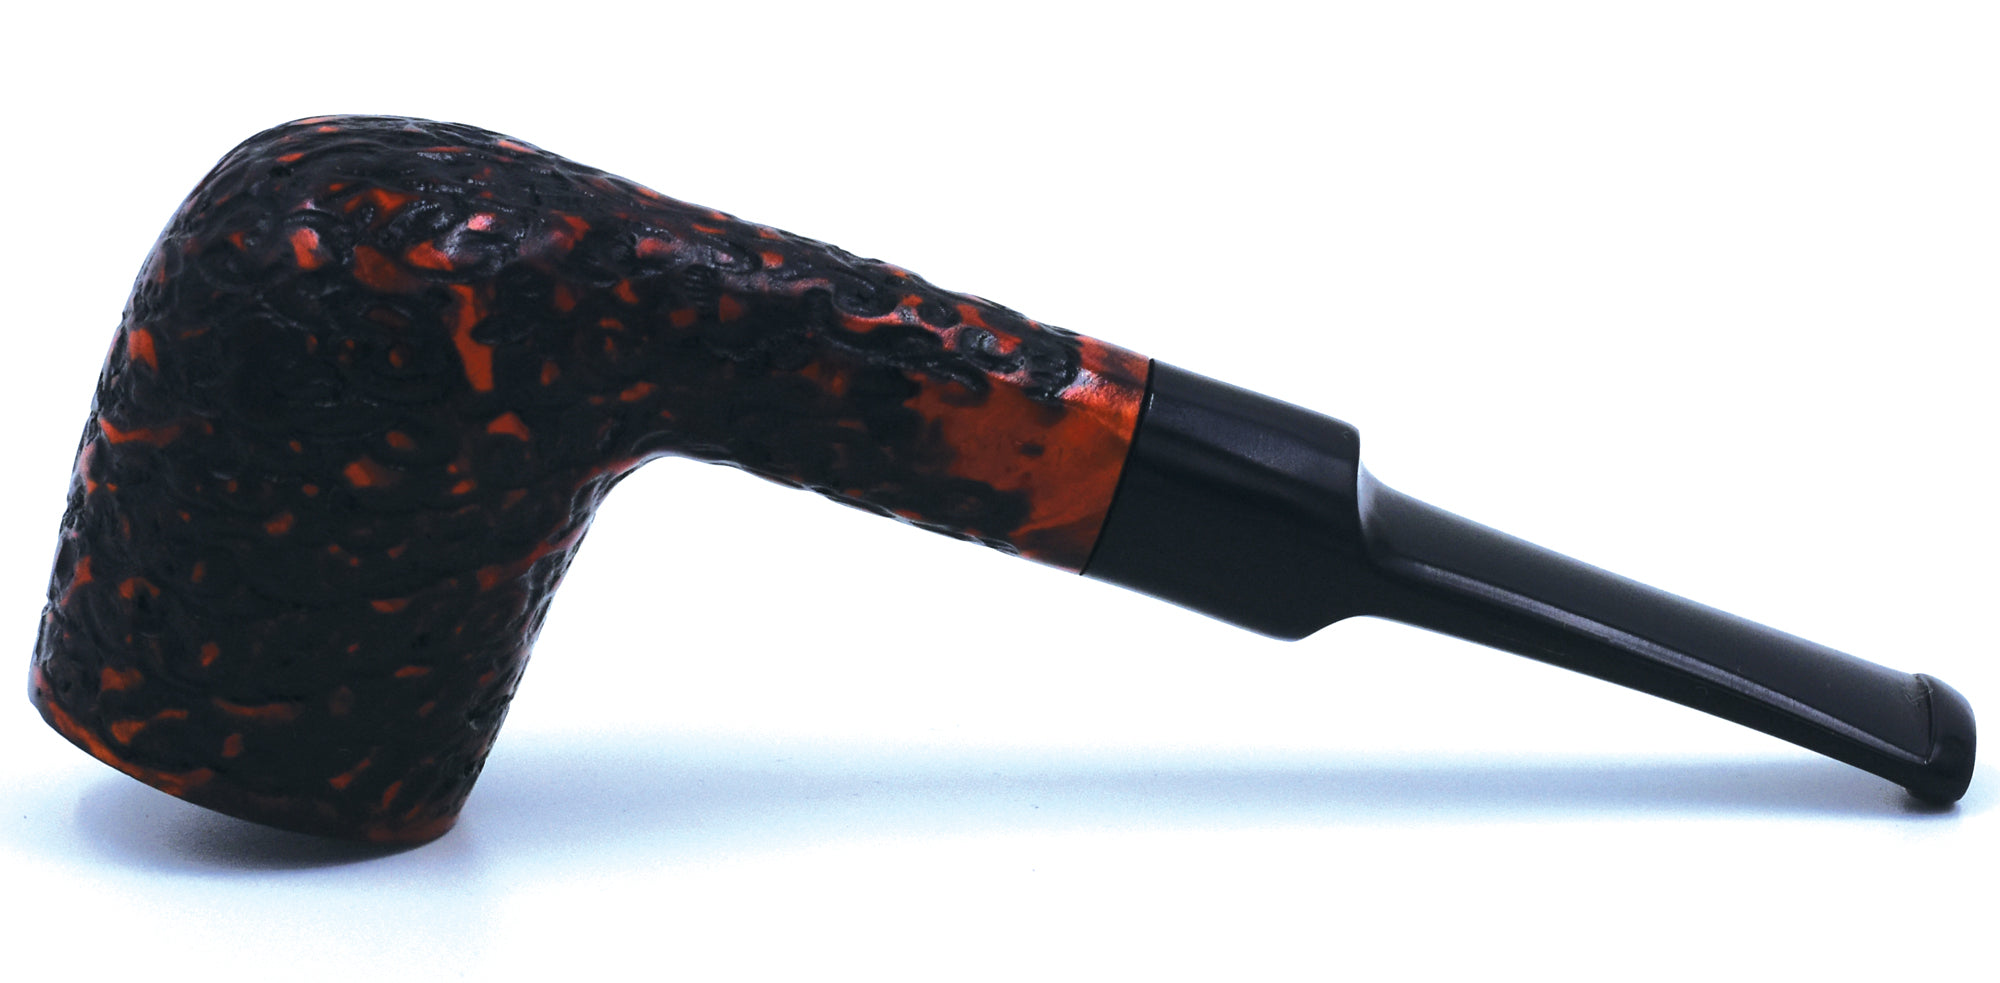 LEGENDEX® LASCALA* 9 MM Filtered Briar Smoking Pipe Made In Italy 01-08-512 Acrylic Series